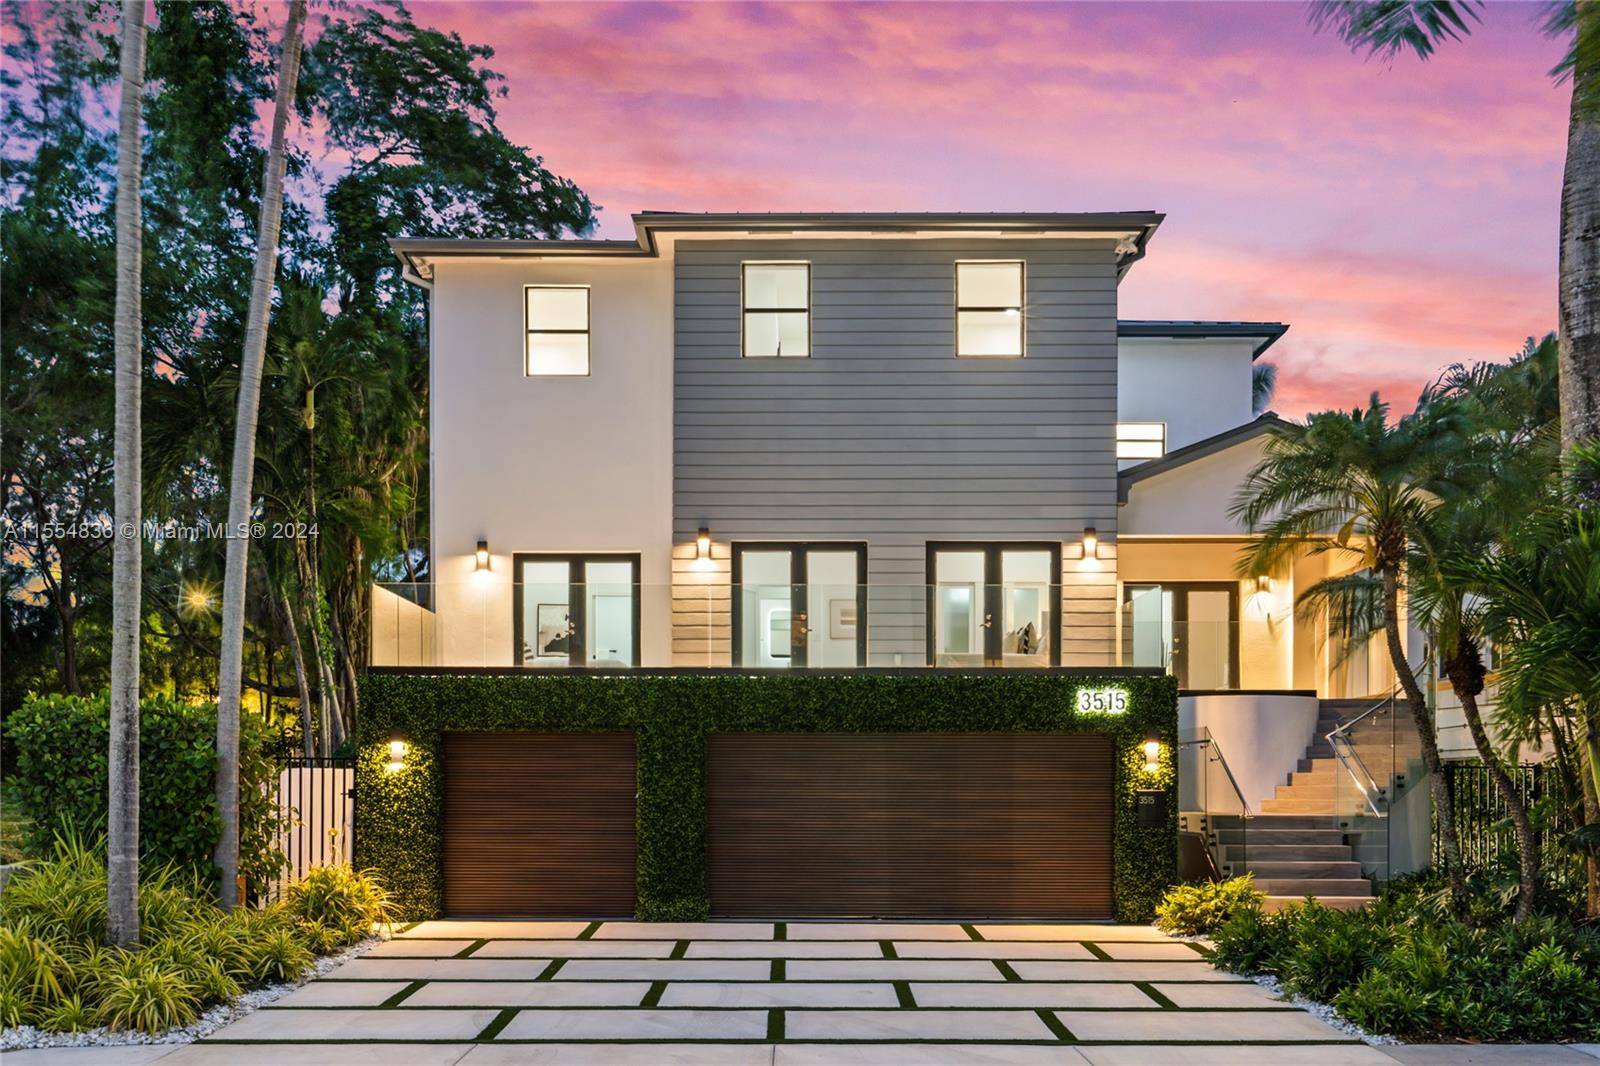 Stunning traditional modern 6 bed 7 bath 3 story home in highly desirable Northeast Coconut Grove.